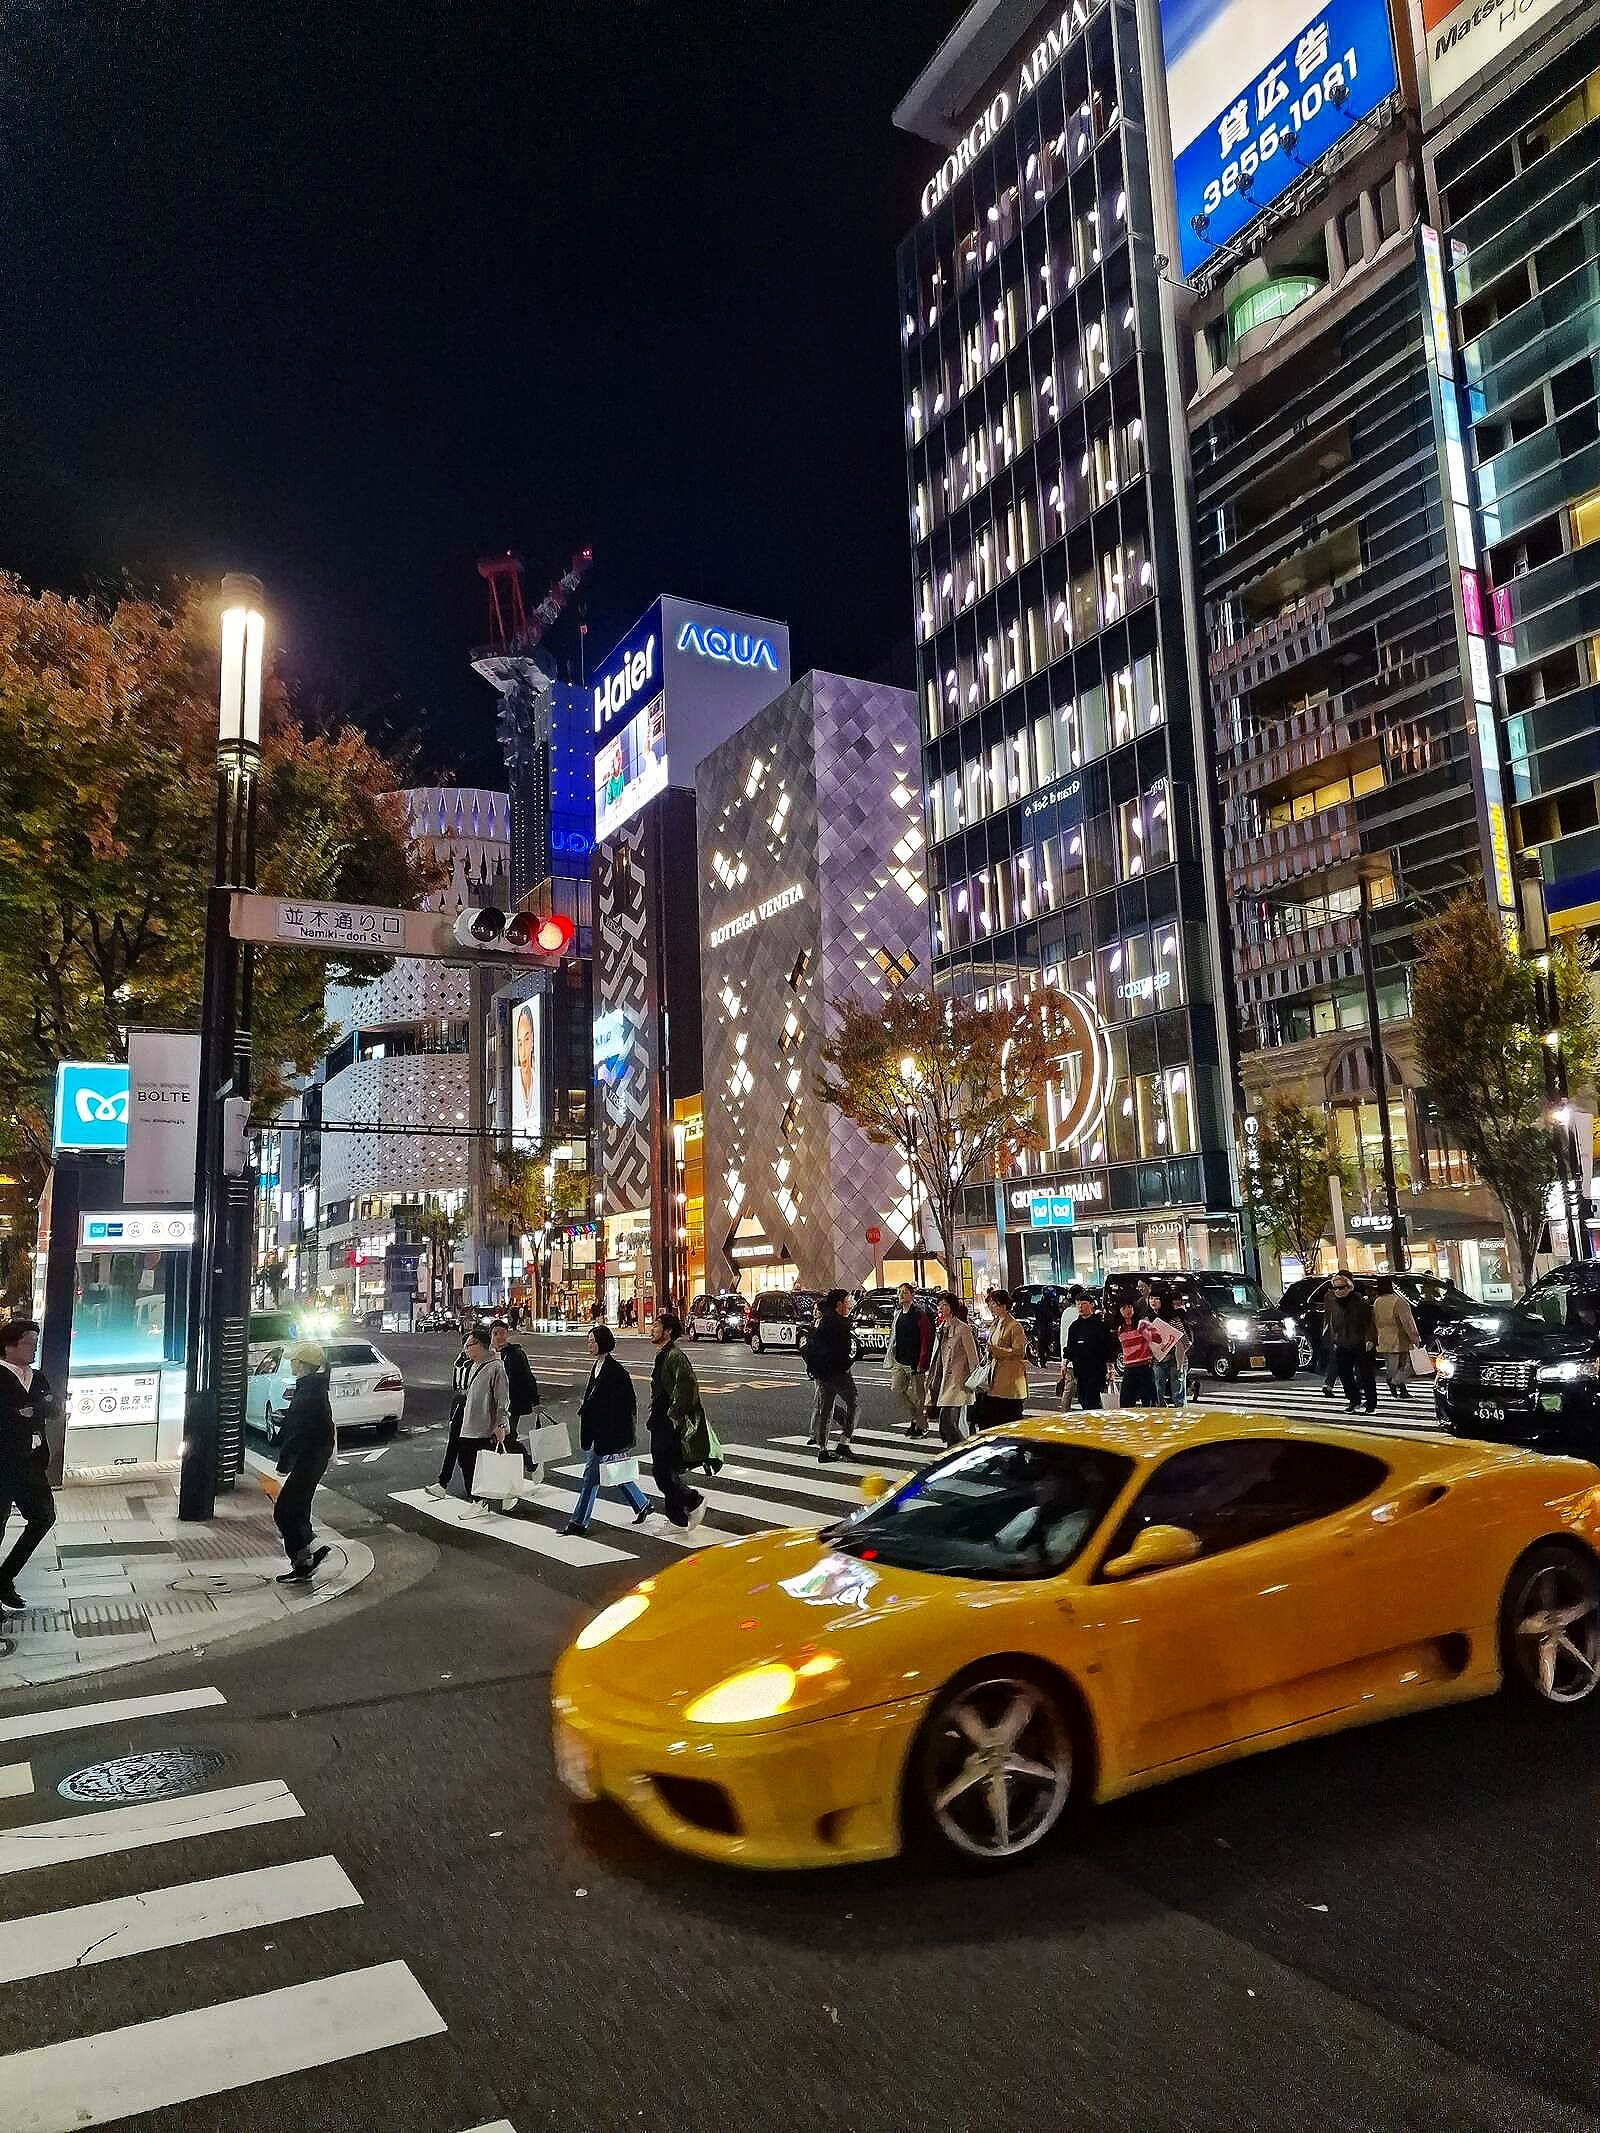 a yellow sports car on the street at night in ginza tokyo